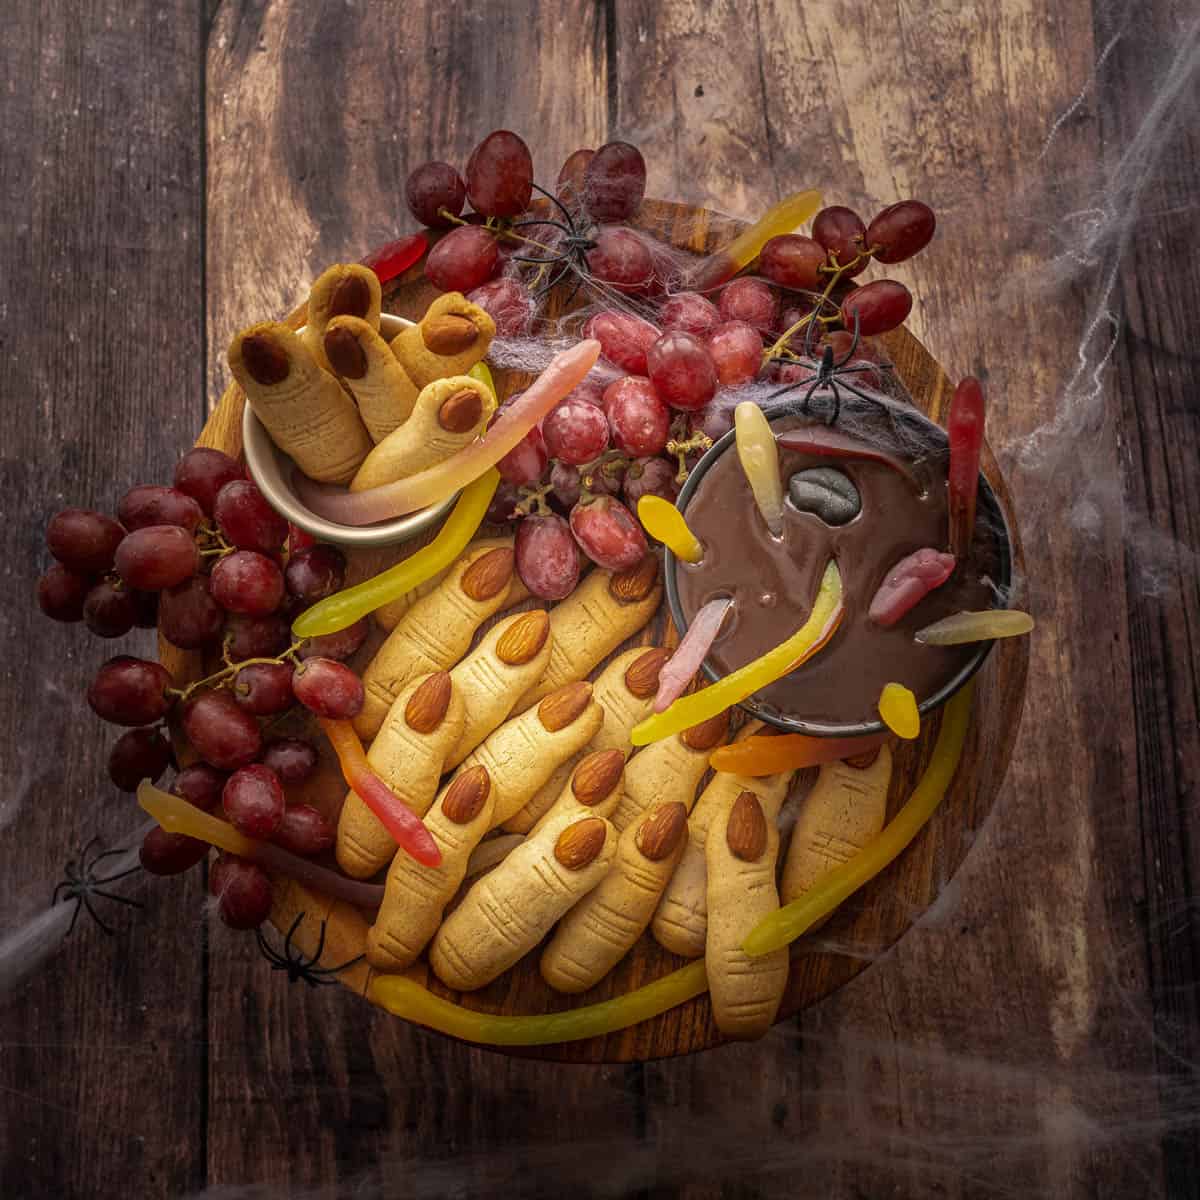 A platter of witch finger cookies and chocolate ganache decorated with gummy snake candy for halloween.